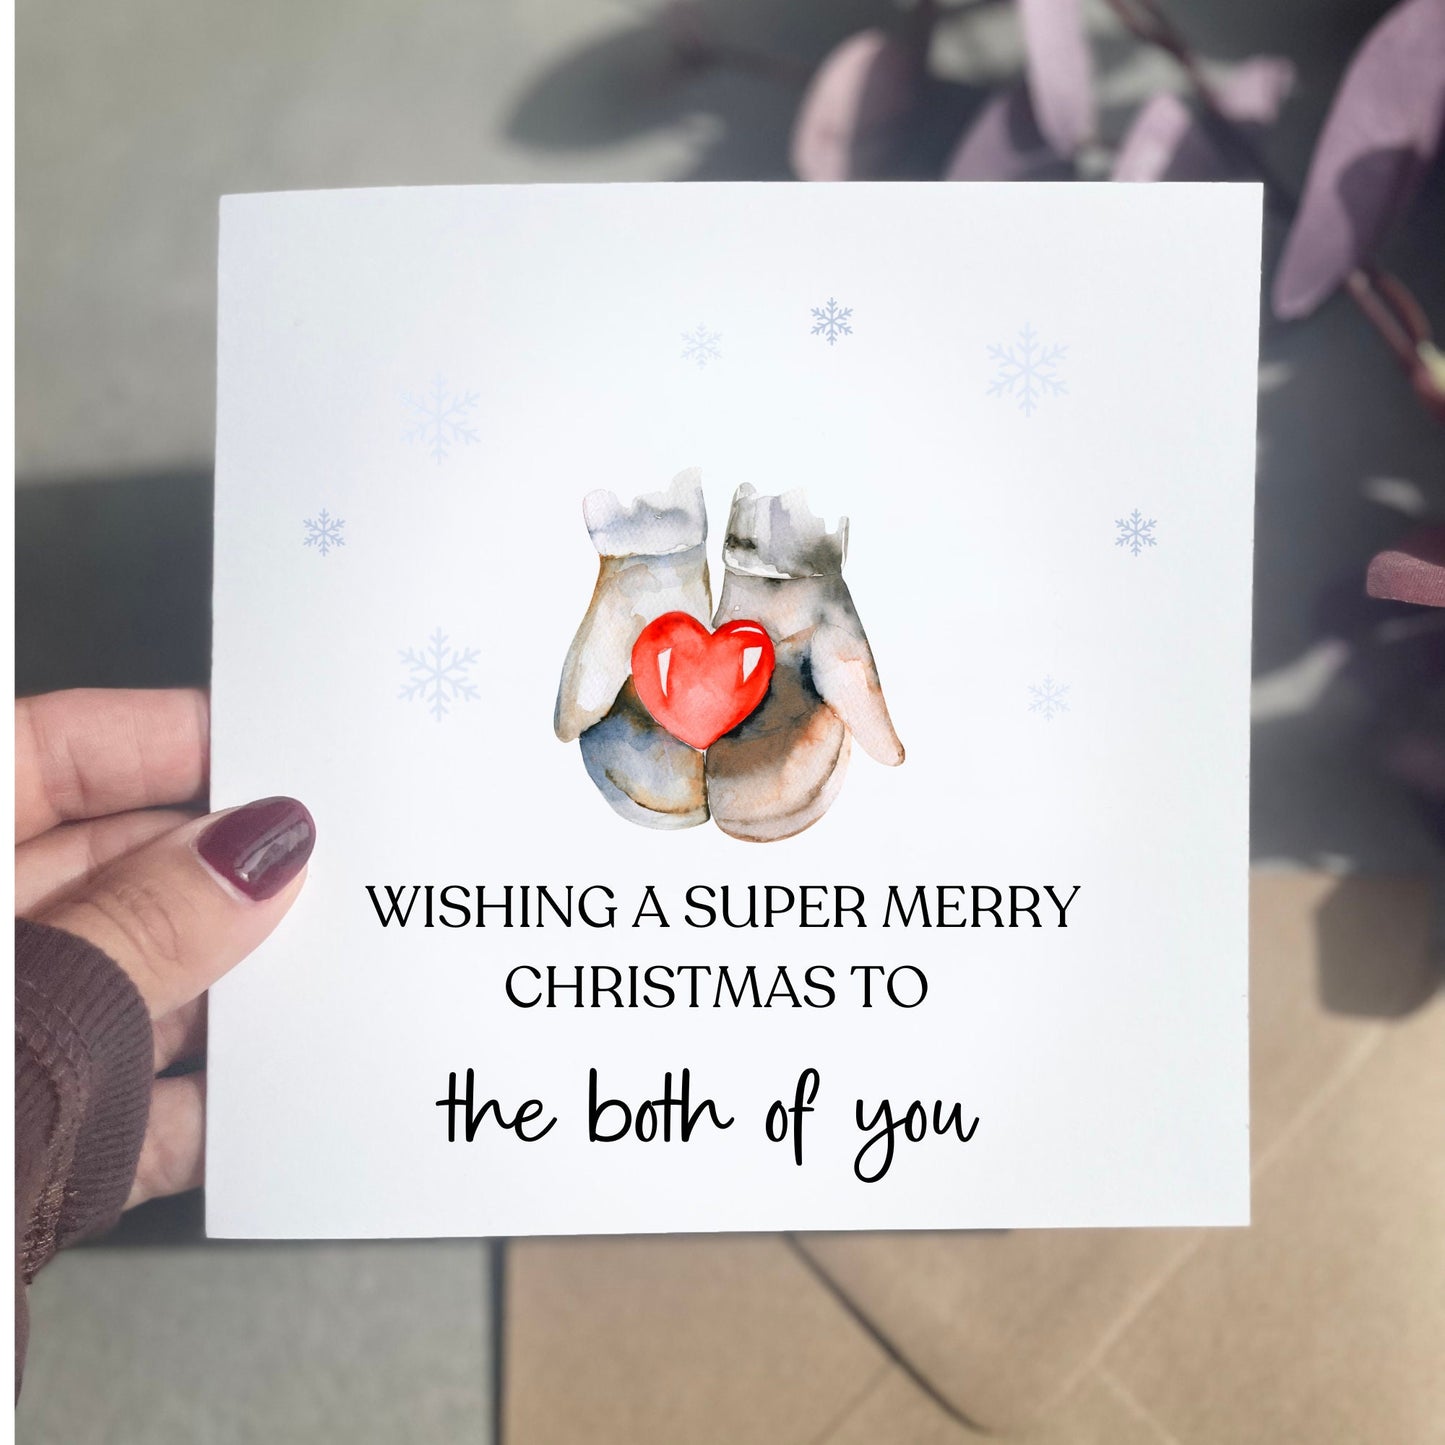 Merry Christmas to both of you, Christmas card for couples, daughter & son in law Xmas card, newlyweds cards, for boyfriend girlfriends